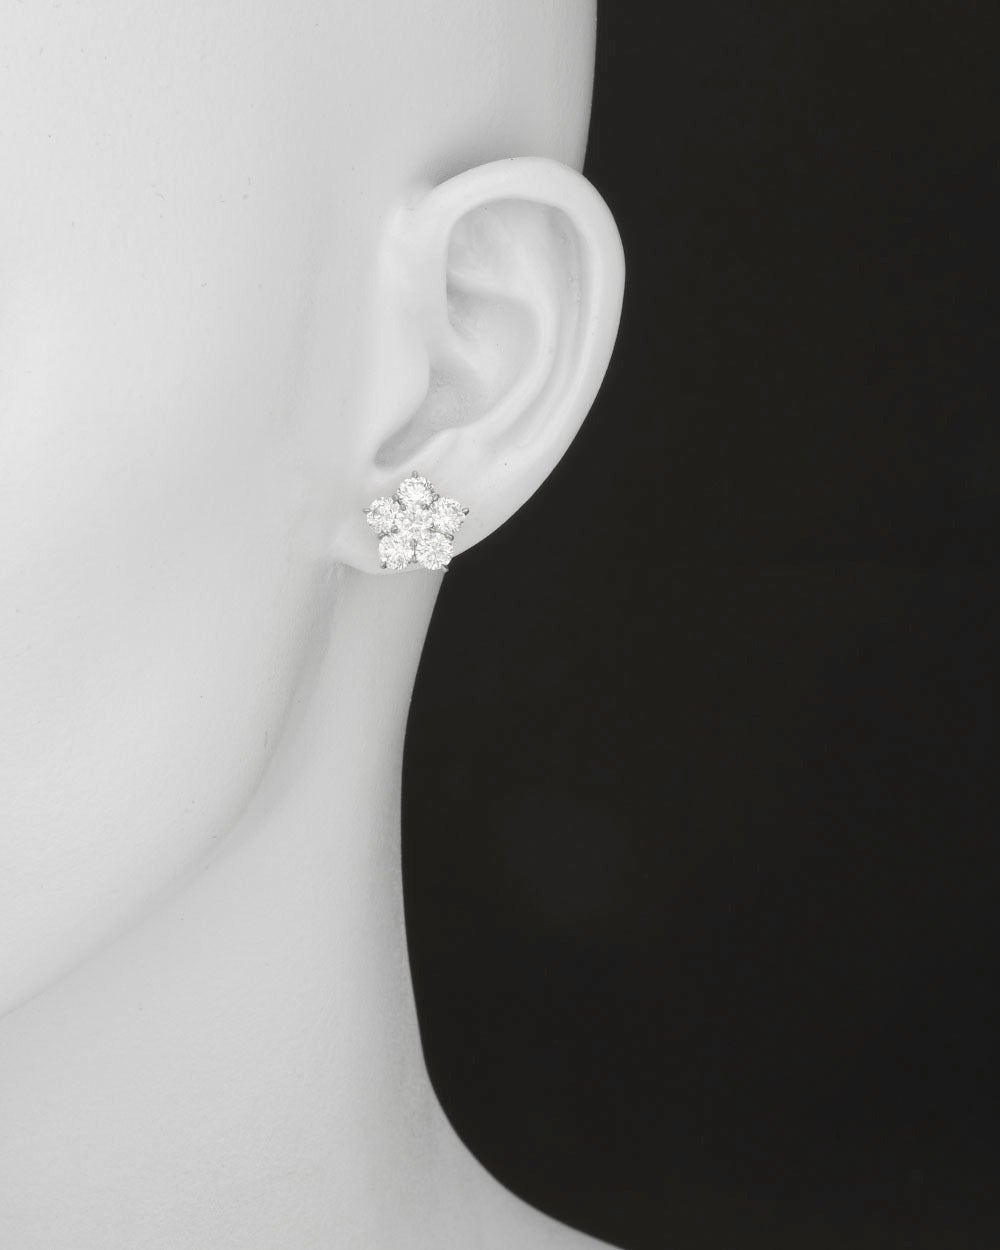 Diamond flower cluster earstuds in platinum. Twelve matching, colorless round brilliant cut diamonds weighing 4.44 total carats, prong-set in platinum with posts and 